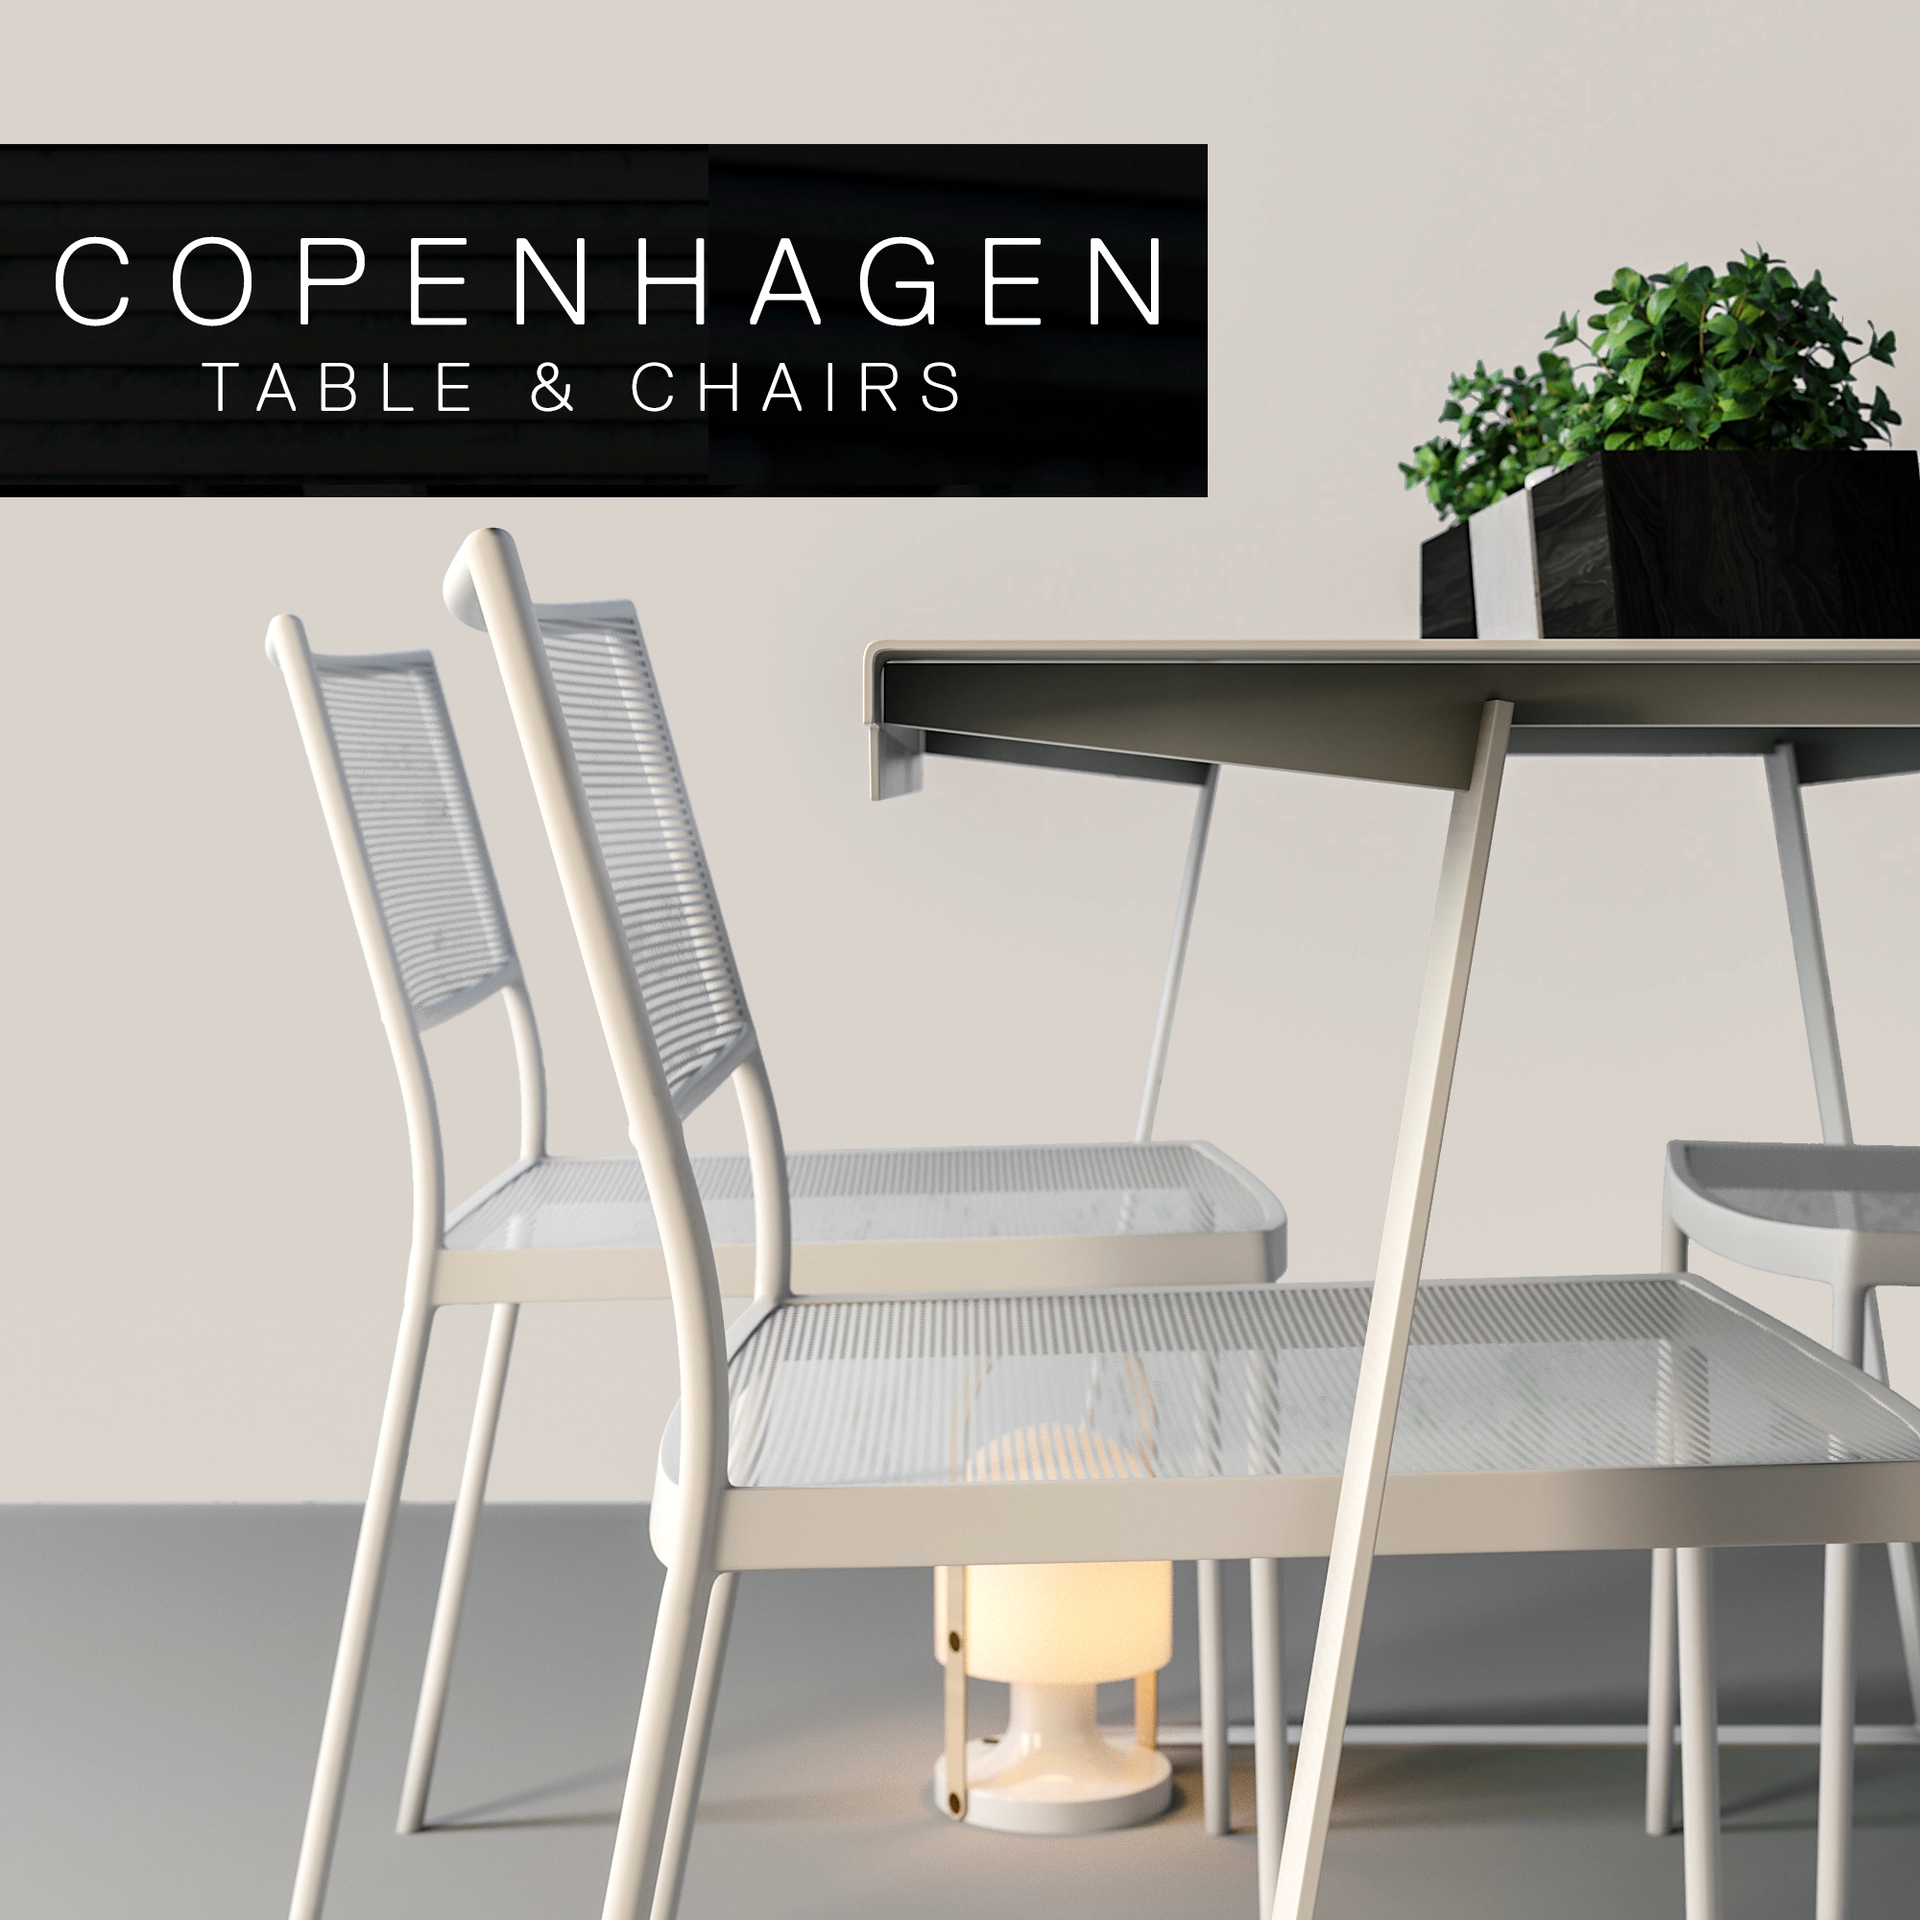 Copenhagen Chairs & Table - Table + Chair